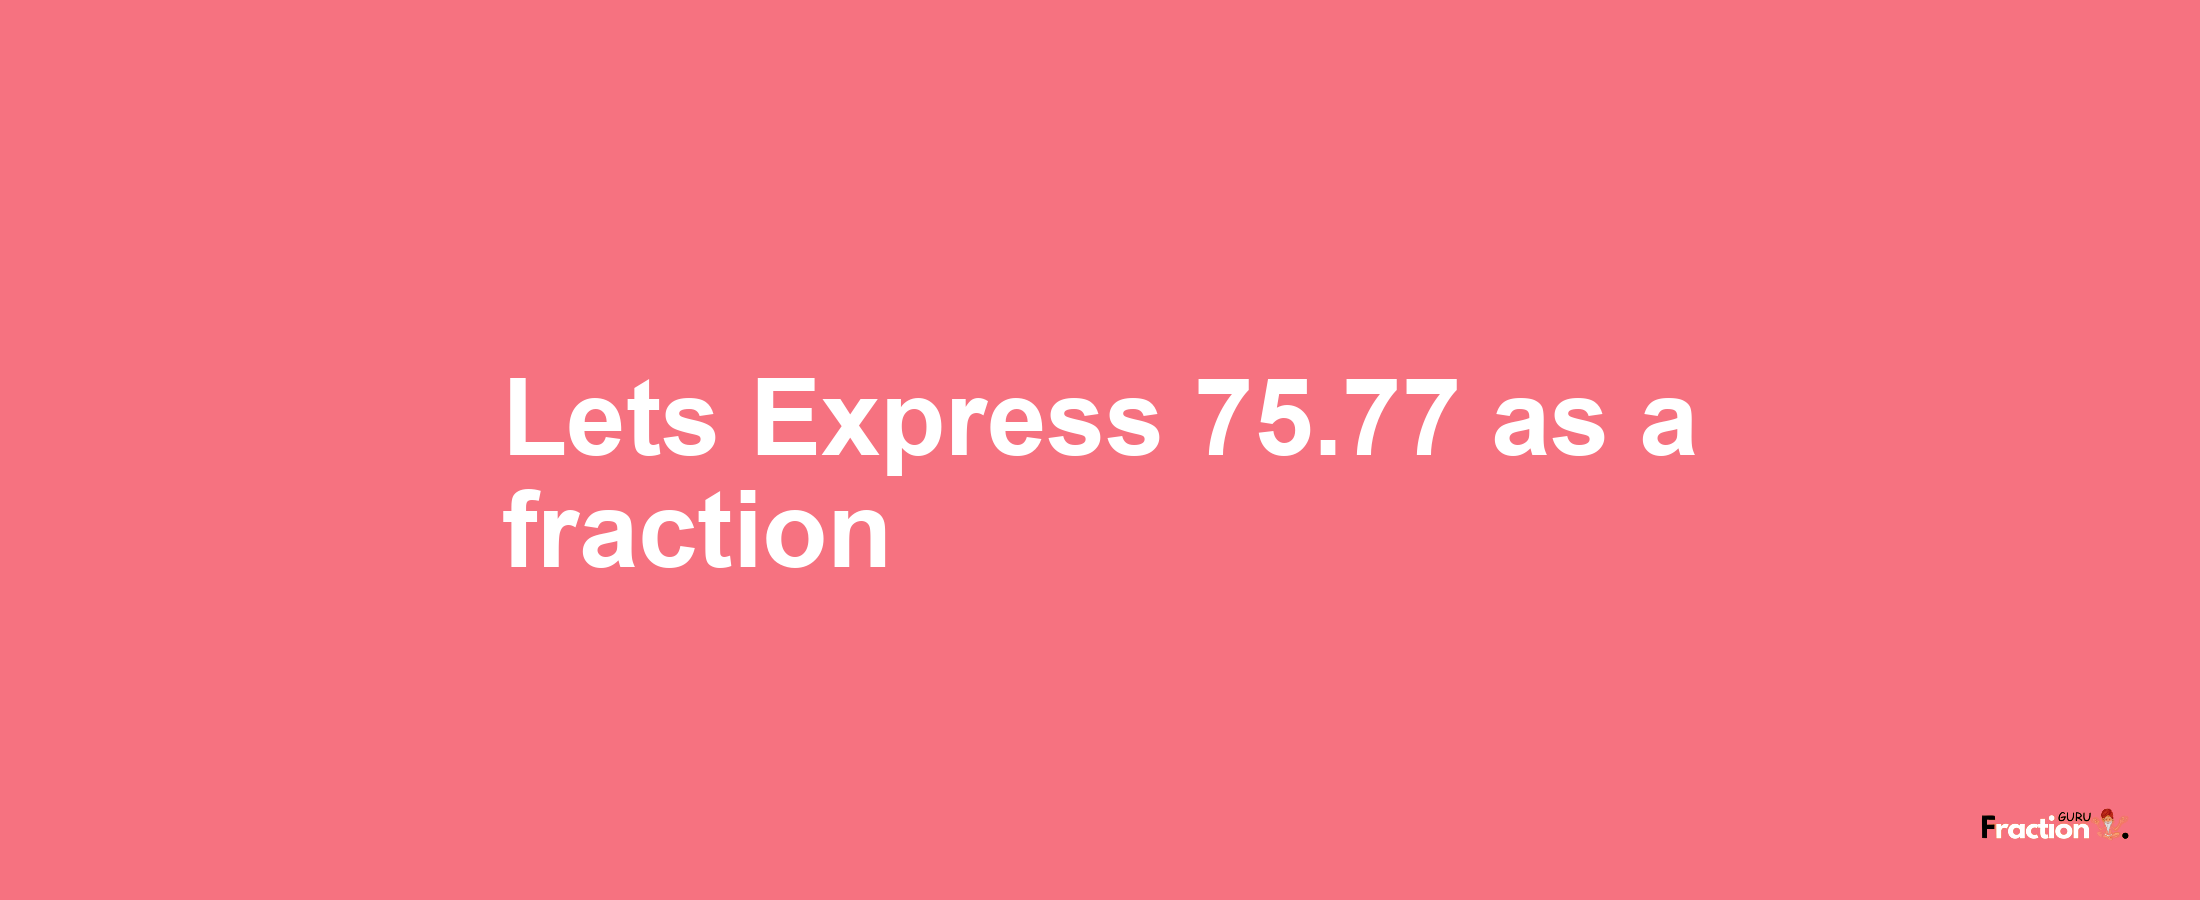 Lets Express 75.77 as afraction